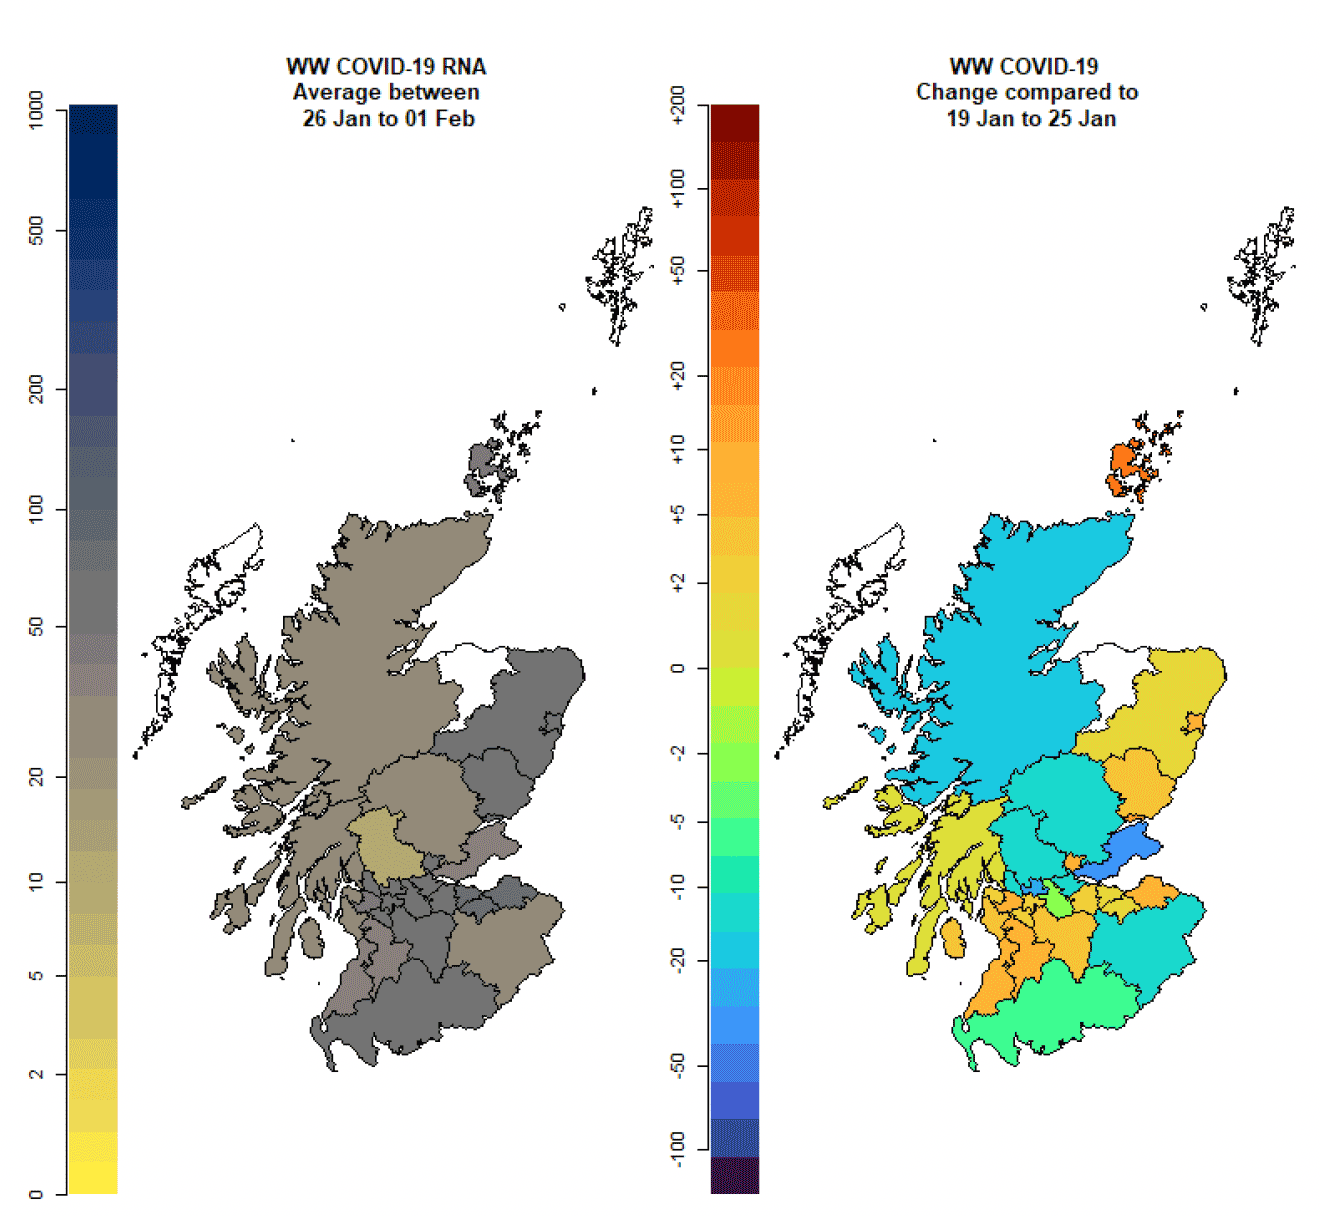 Two maps of Scotland, showing the wastewater Covid-19 levels for each local authority for the week ending 1st February, and the changes relative to the week ending 25th January.